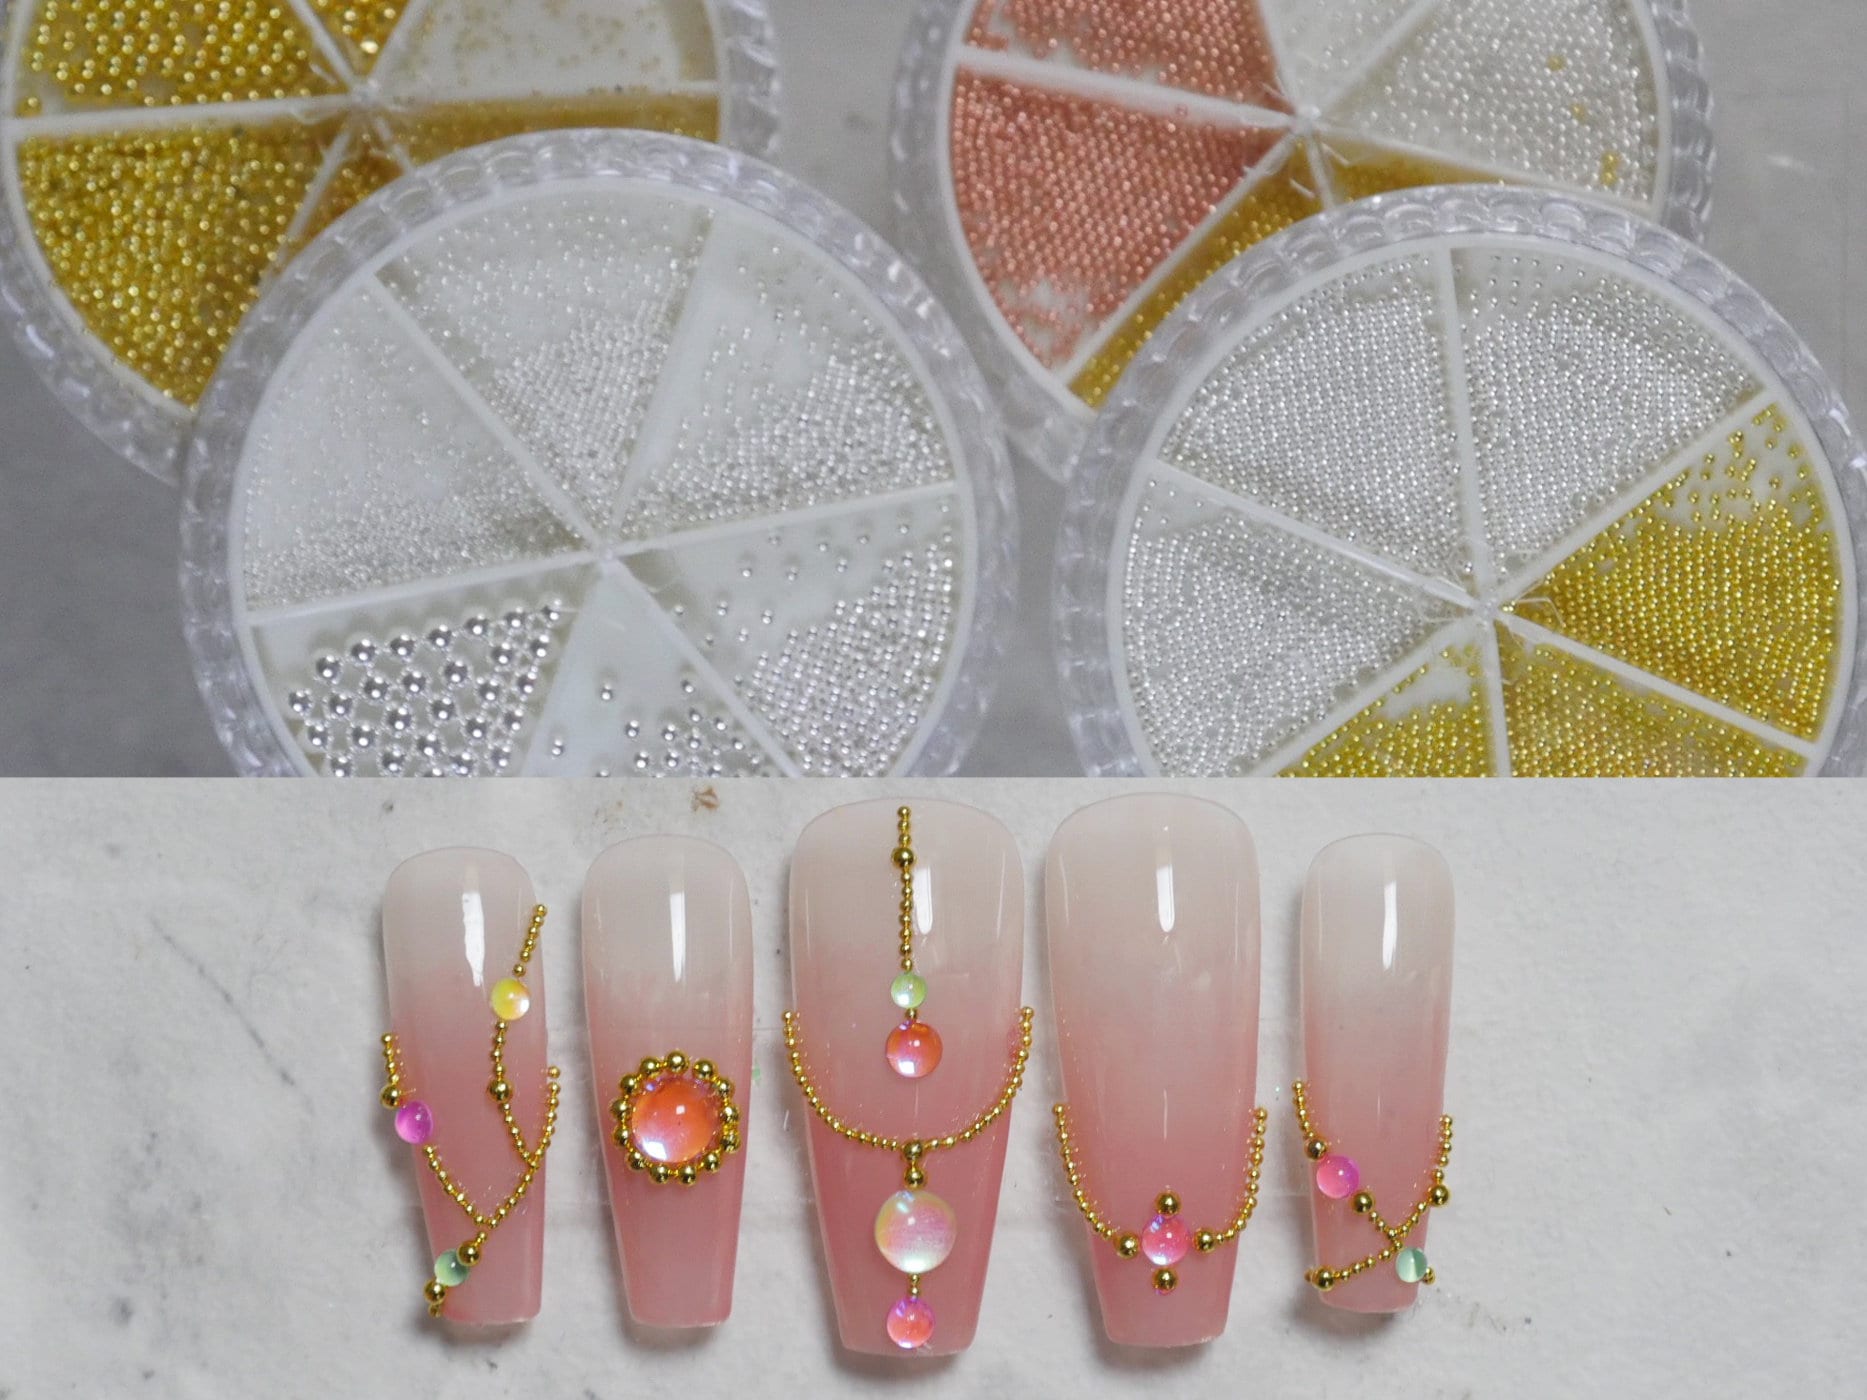 Nail Beads Macaron Color Steel Tiny Balls Nails Jewelry Manicure DIY US